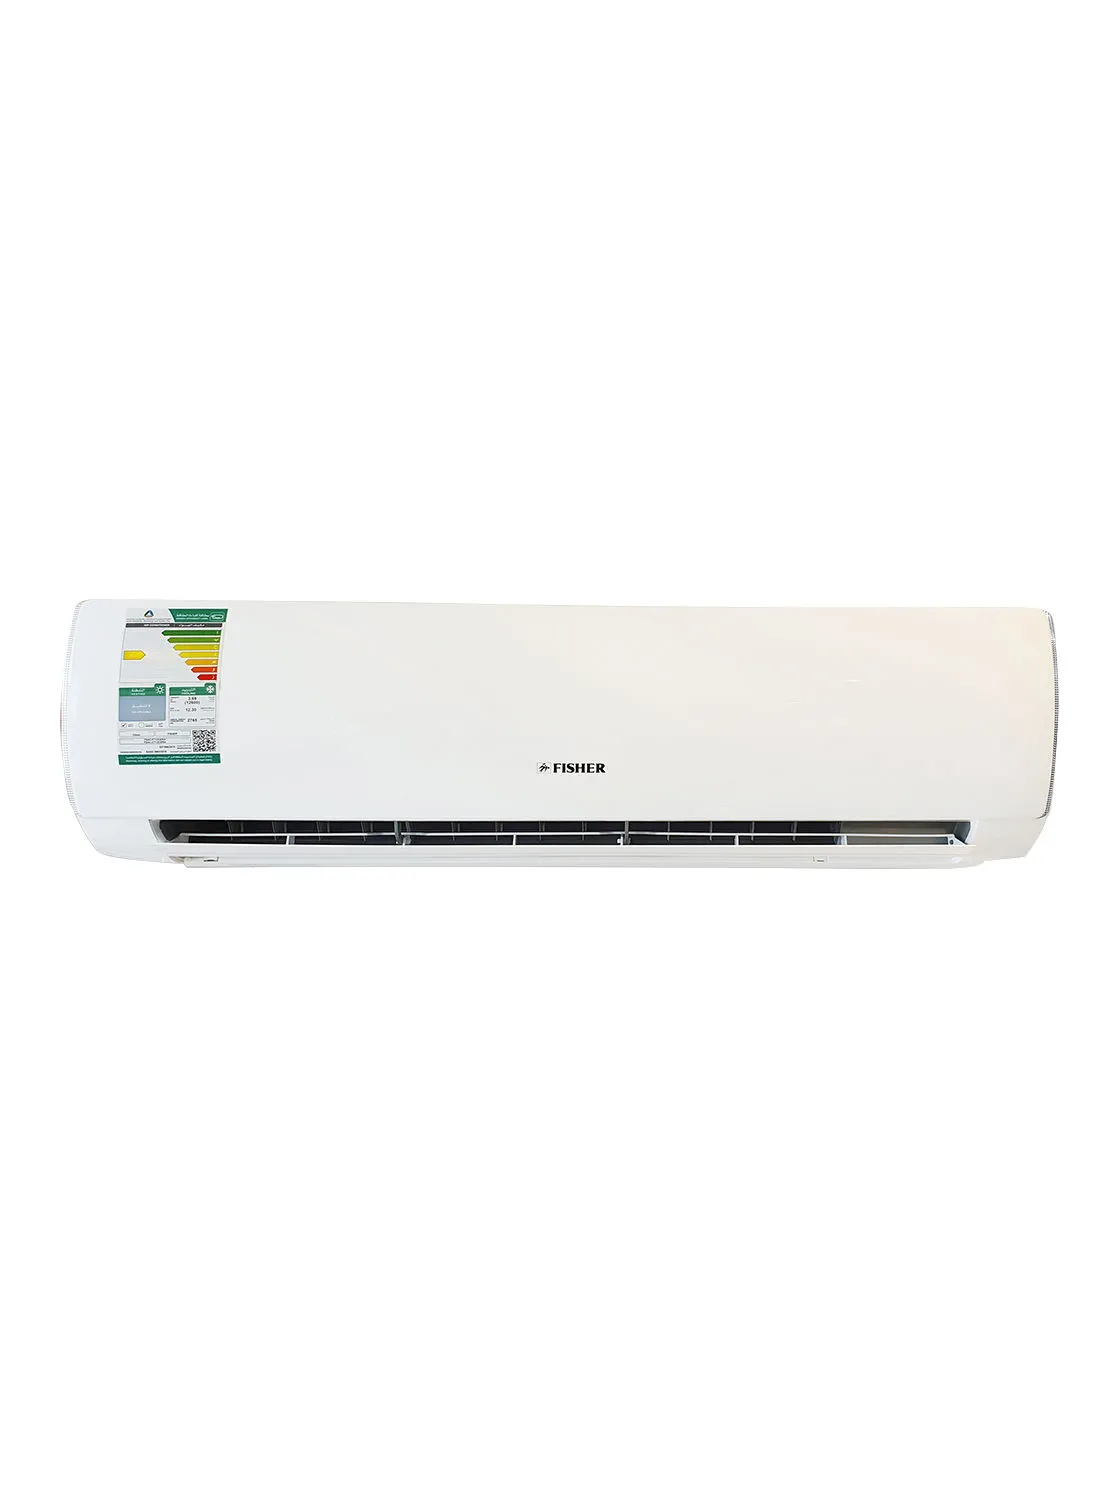 FISHER Split Air Conditioner ( 2.23 Tons ) 26800 BTU Cold FSAC-FT30CERAN1 ,  with WIFI,  ( 2022 Model)